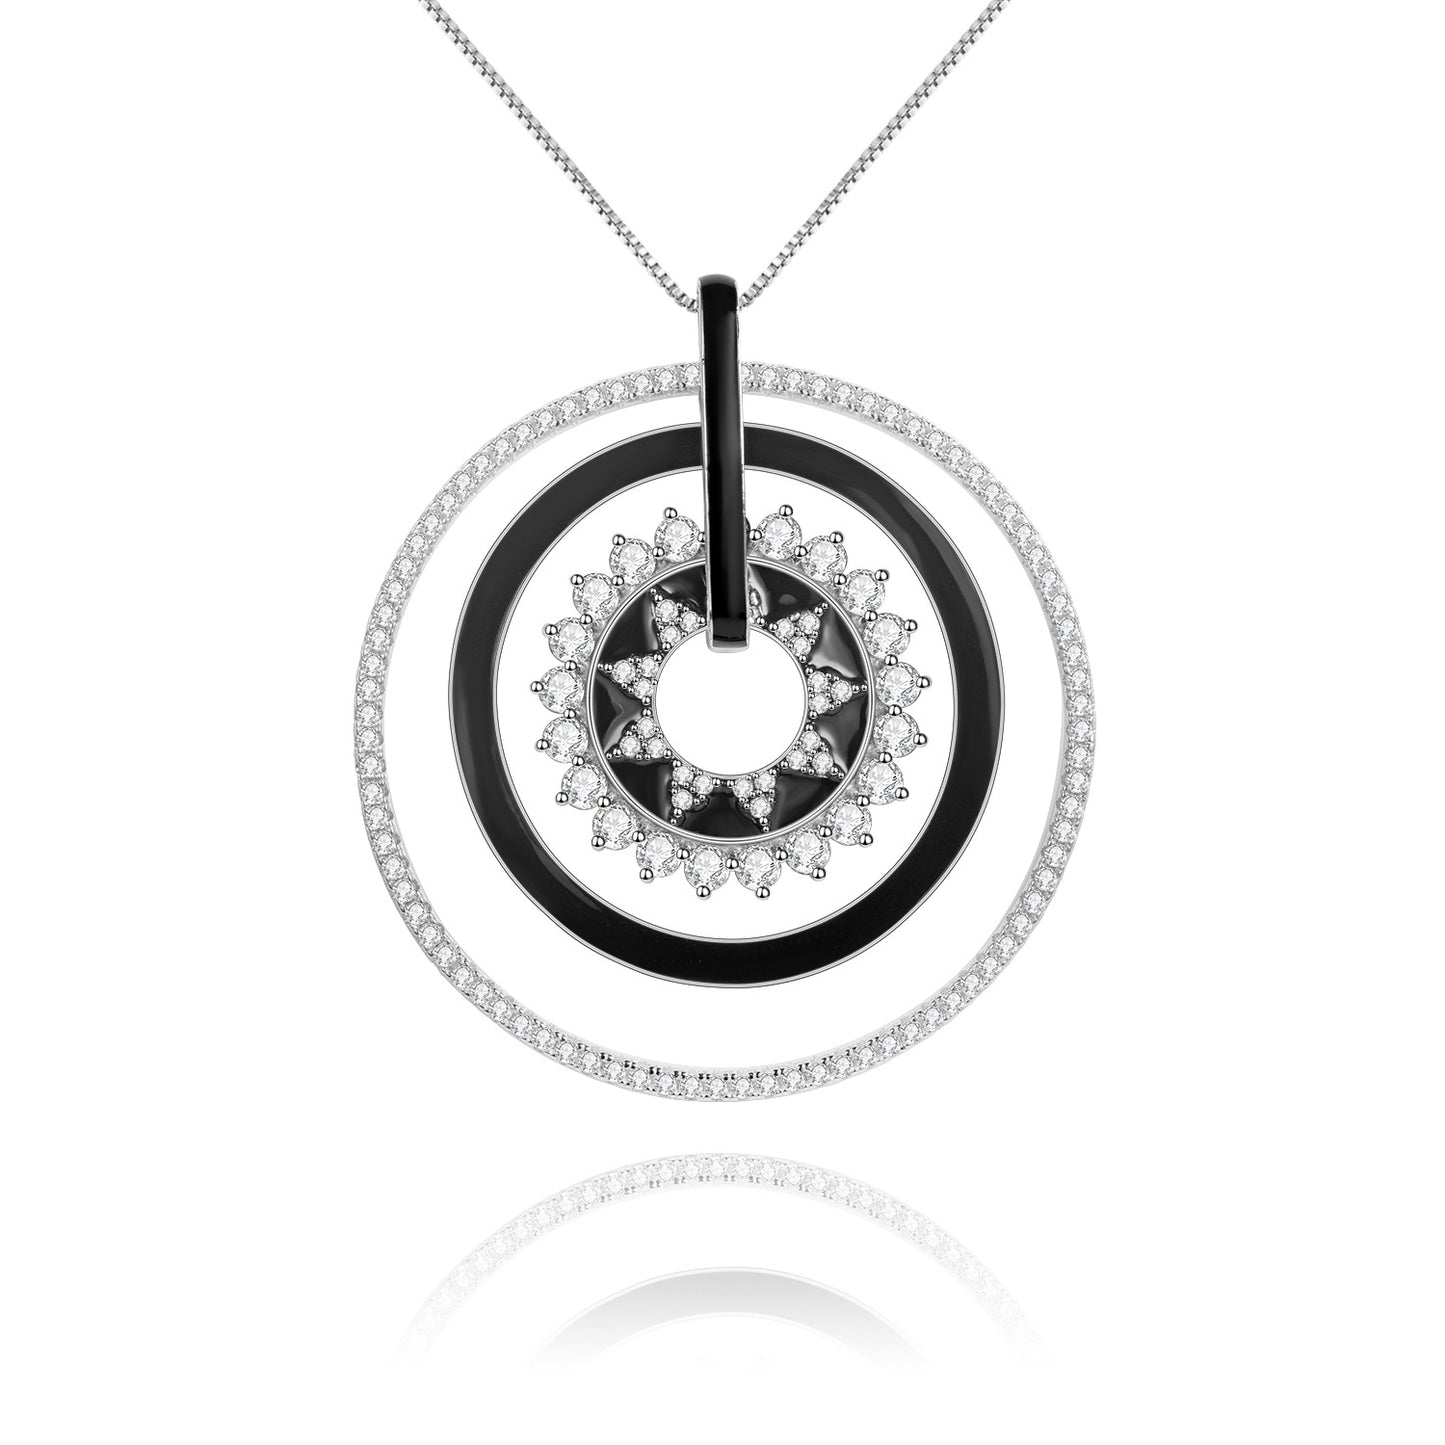 Natural Colourful Gemstones Enamel Circle Pendant Silver Necklace for Women